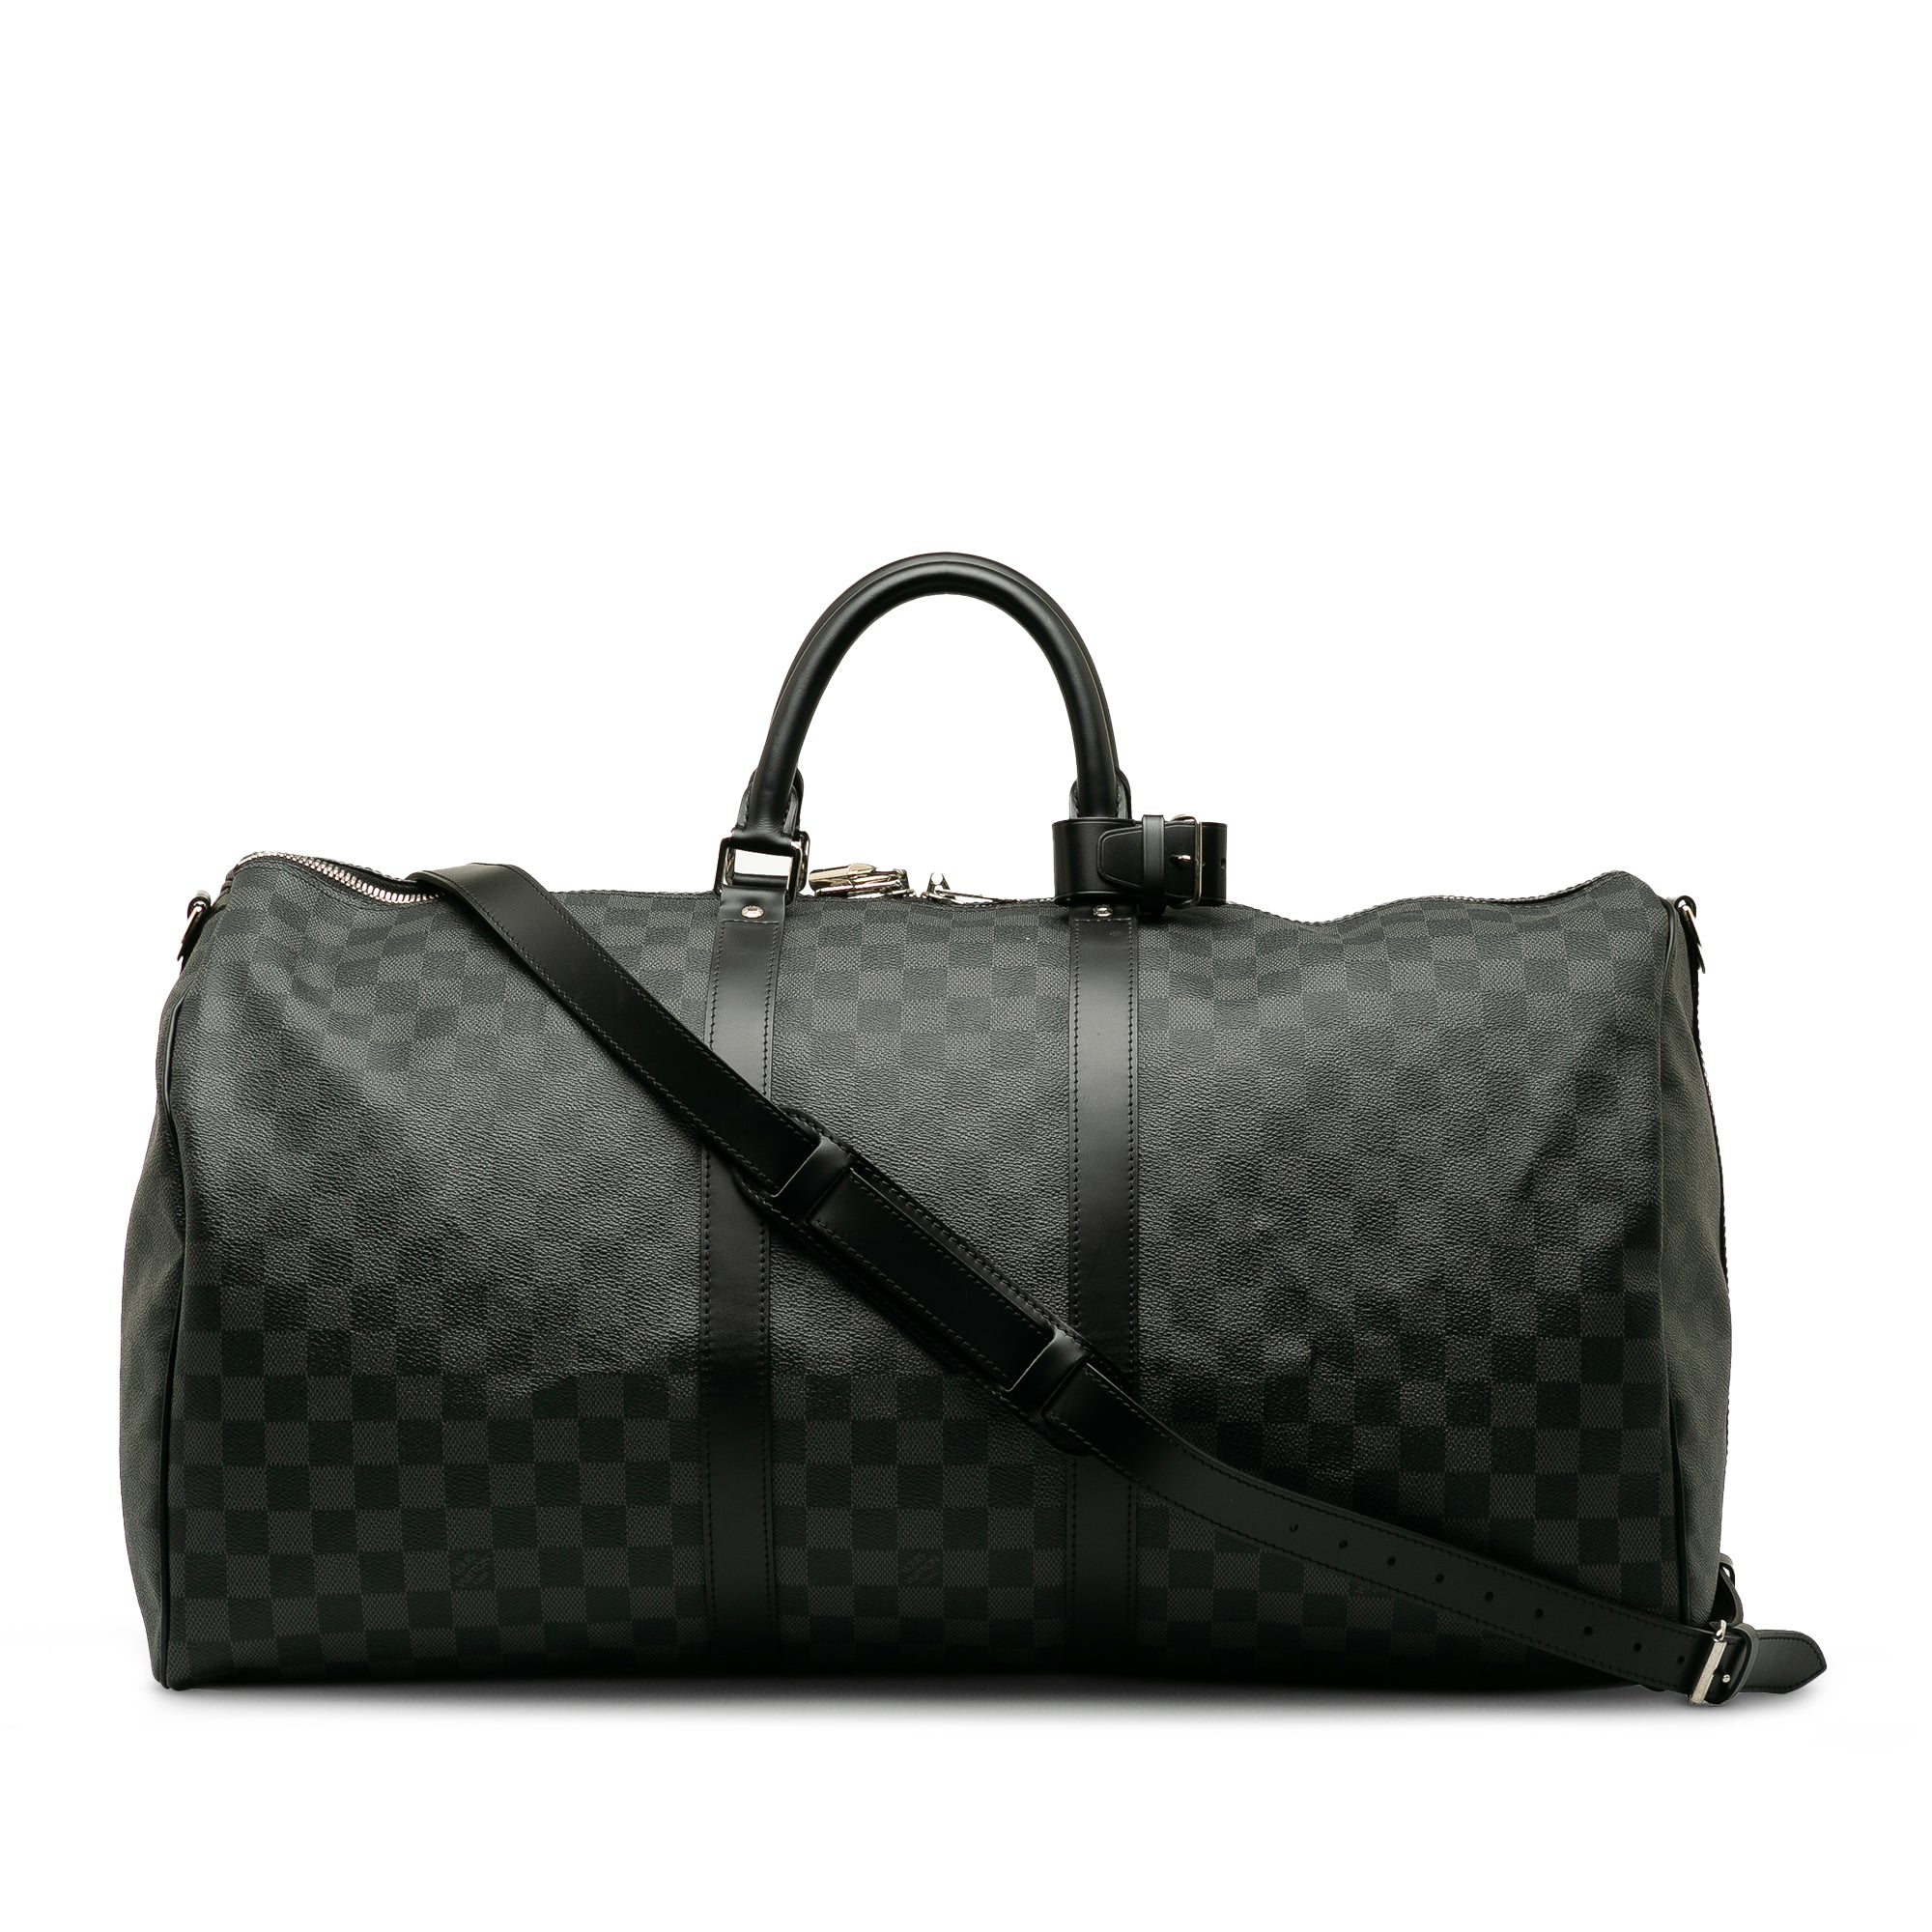 Damier Graphite Keepall Bandouliere 55 Travel Bag